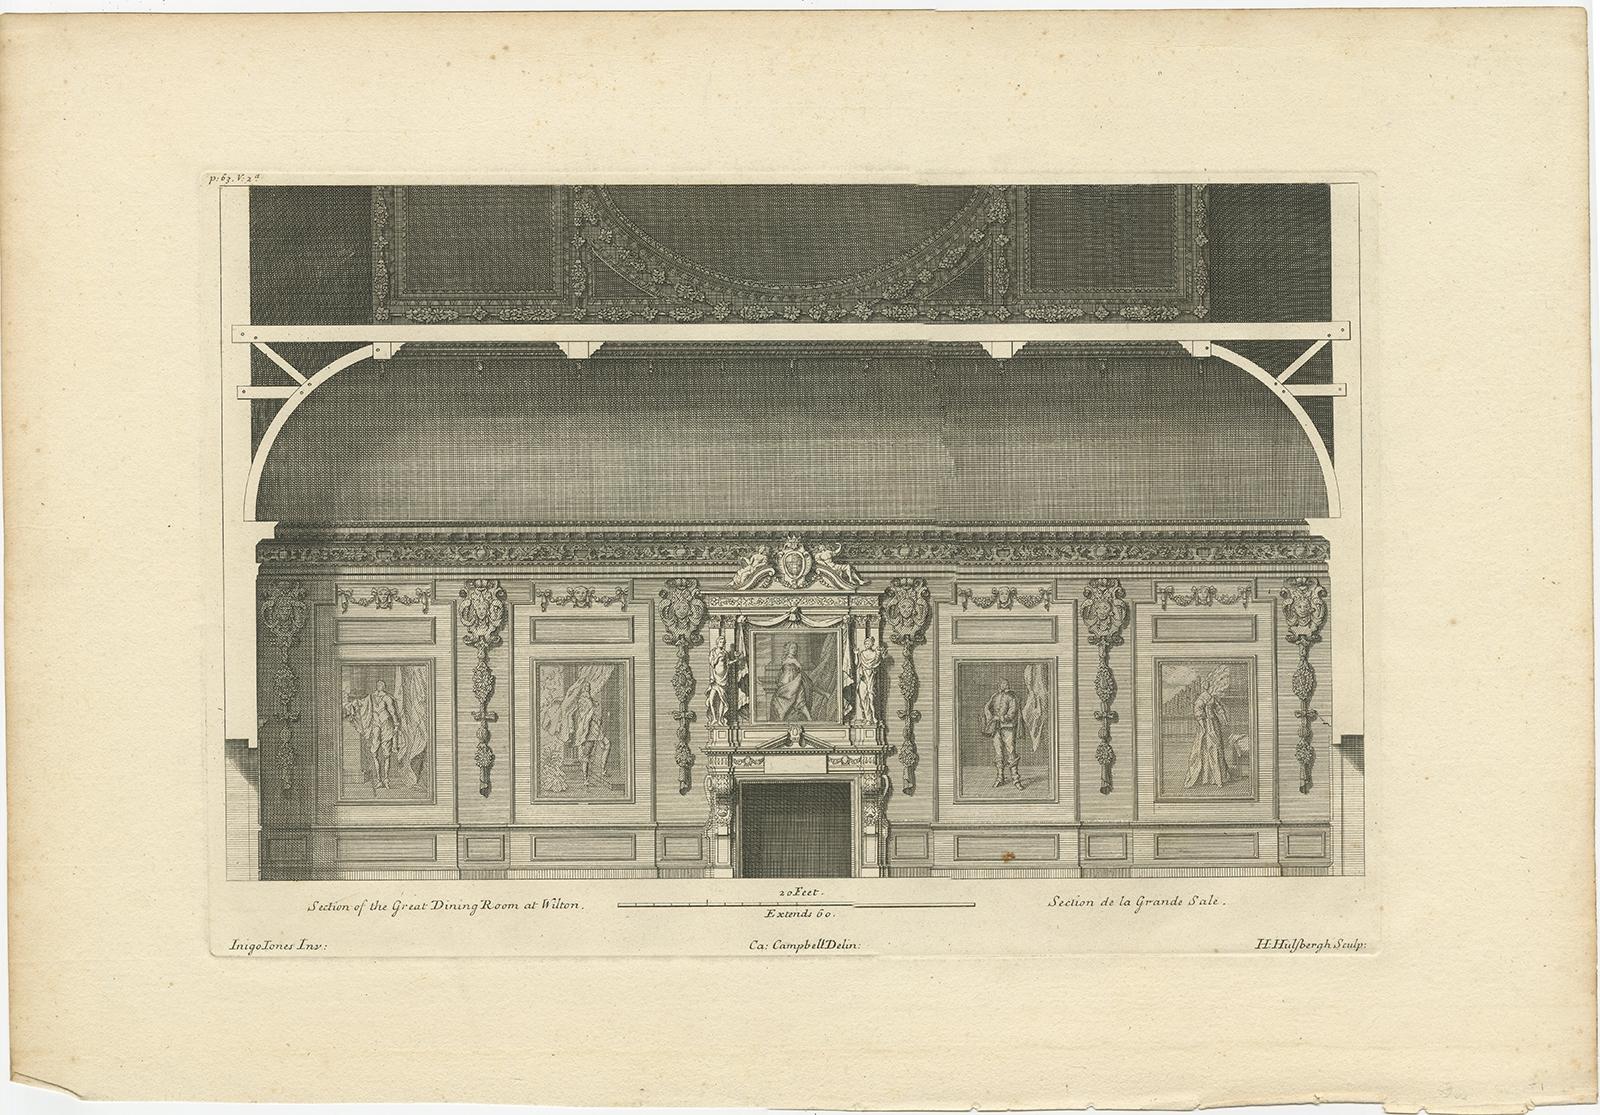 Antique print titled 'Section of the Great Dining Room at Wilton (..)'. 

View of the great dining room of Wilton House, also known as the 'Double Cube Room' this room was part of a design for a series of state rooms by the architects Inigo Jones